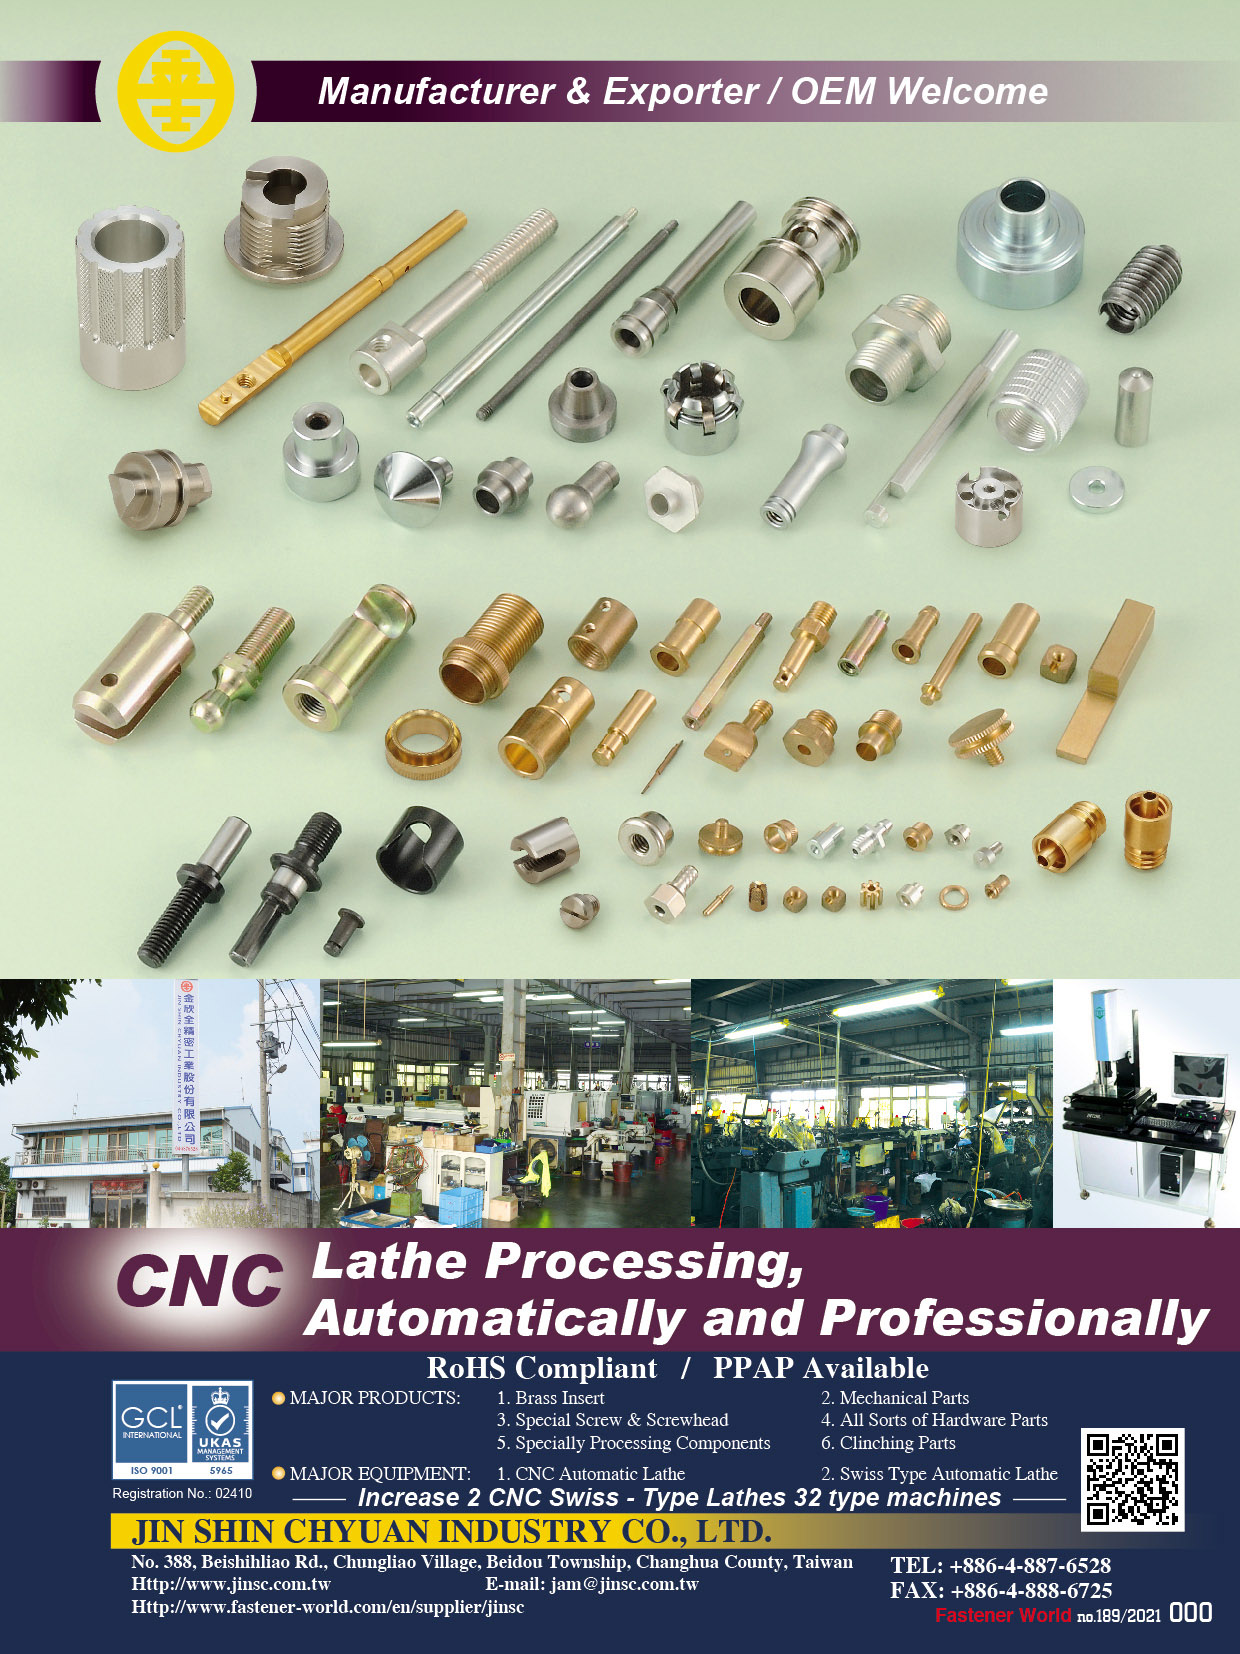 JIN SHIN CHYUAN INDUSTRY CO., LTD.  , Brass Insert, Mechanical Parts, Special Screw & Screwhead, All Sorts of Hardware Parts, Specially Processing Components, Clinching Parts, CNC Automatic Lathe, Swiss Type Automatic Lathe , CNC parts, CNC lathe